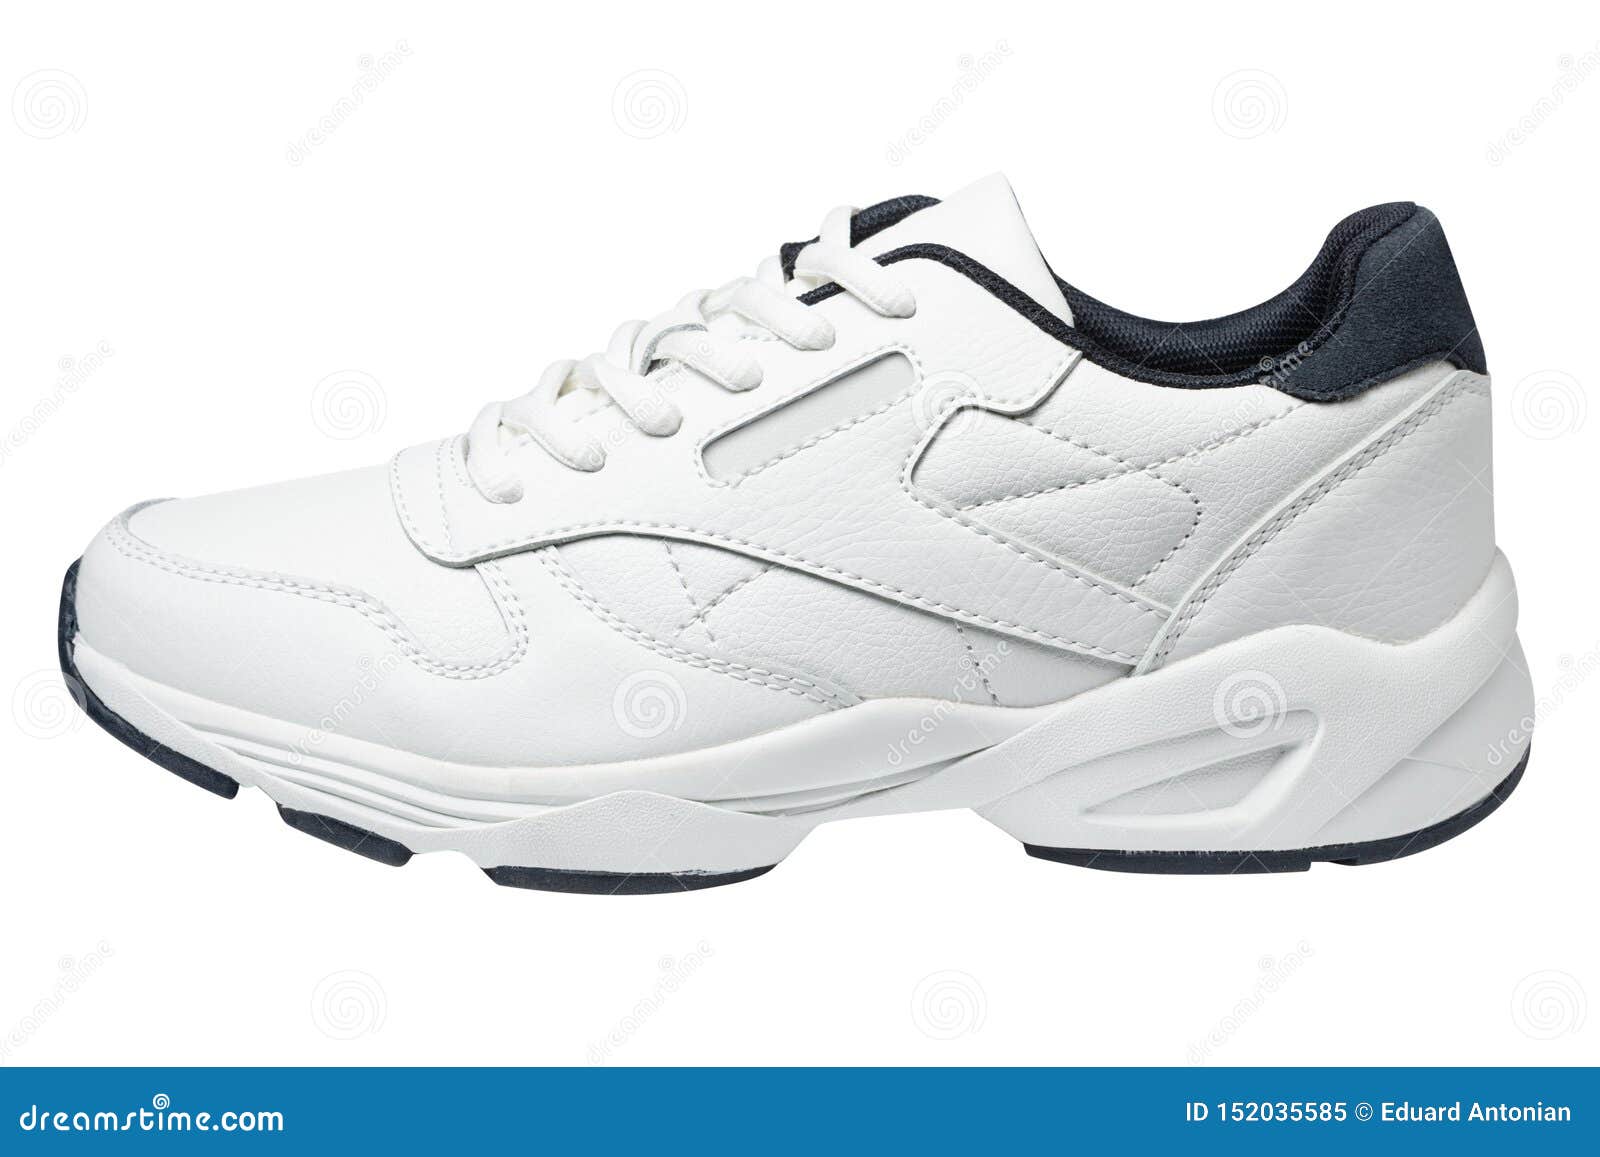 One Sneaker, Side View, for an Active Lifestyle, on a White Background Stock Image - Image of rubber, casual: 152035585